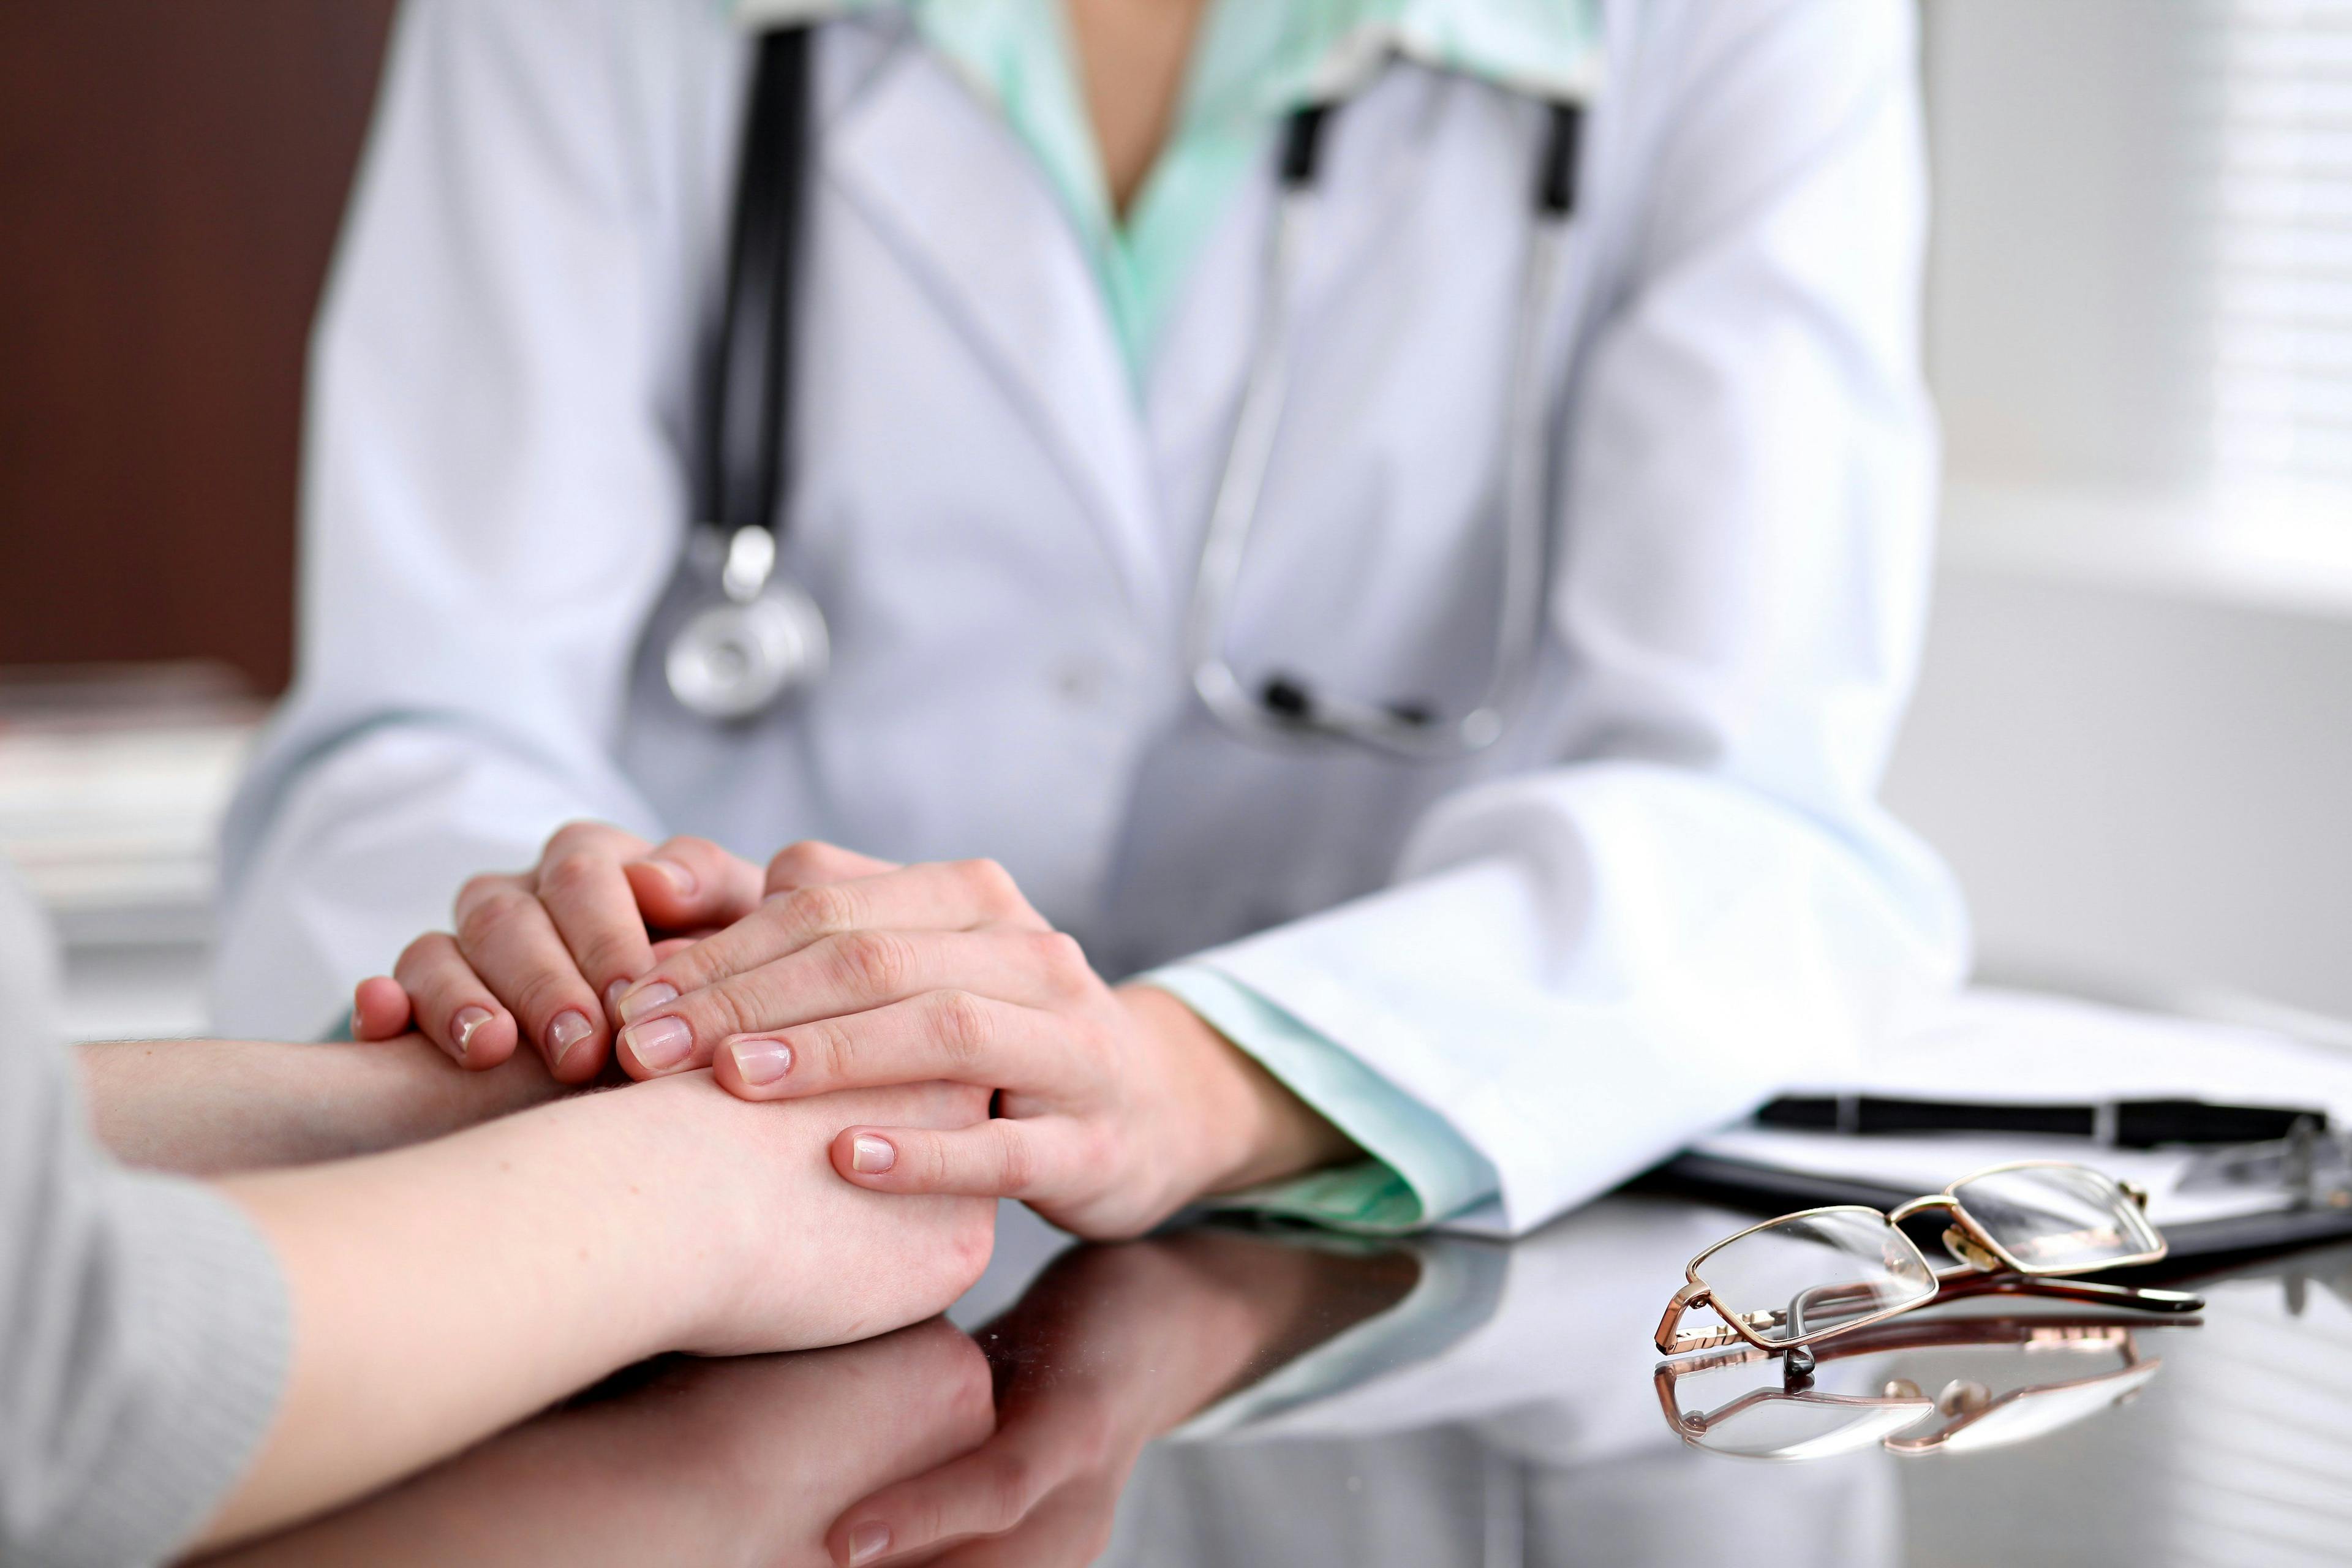 How can physicians show patients more compassion?